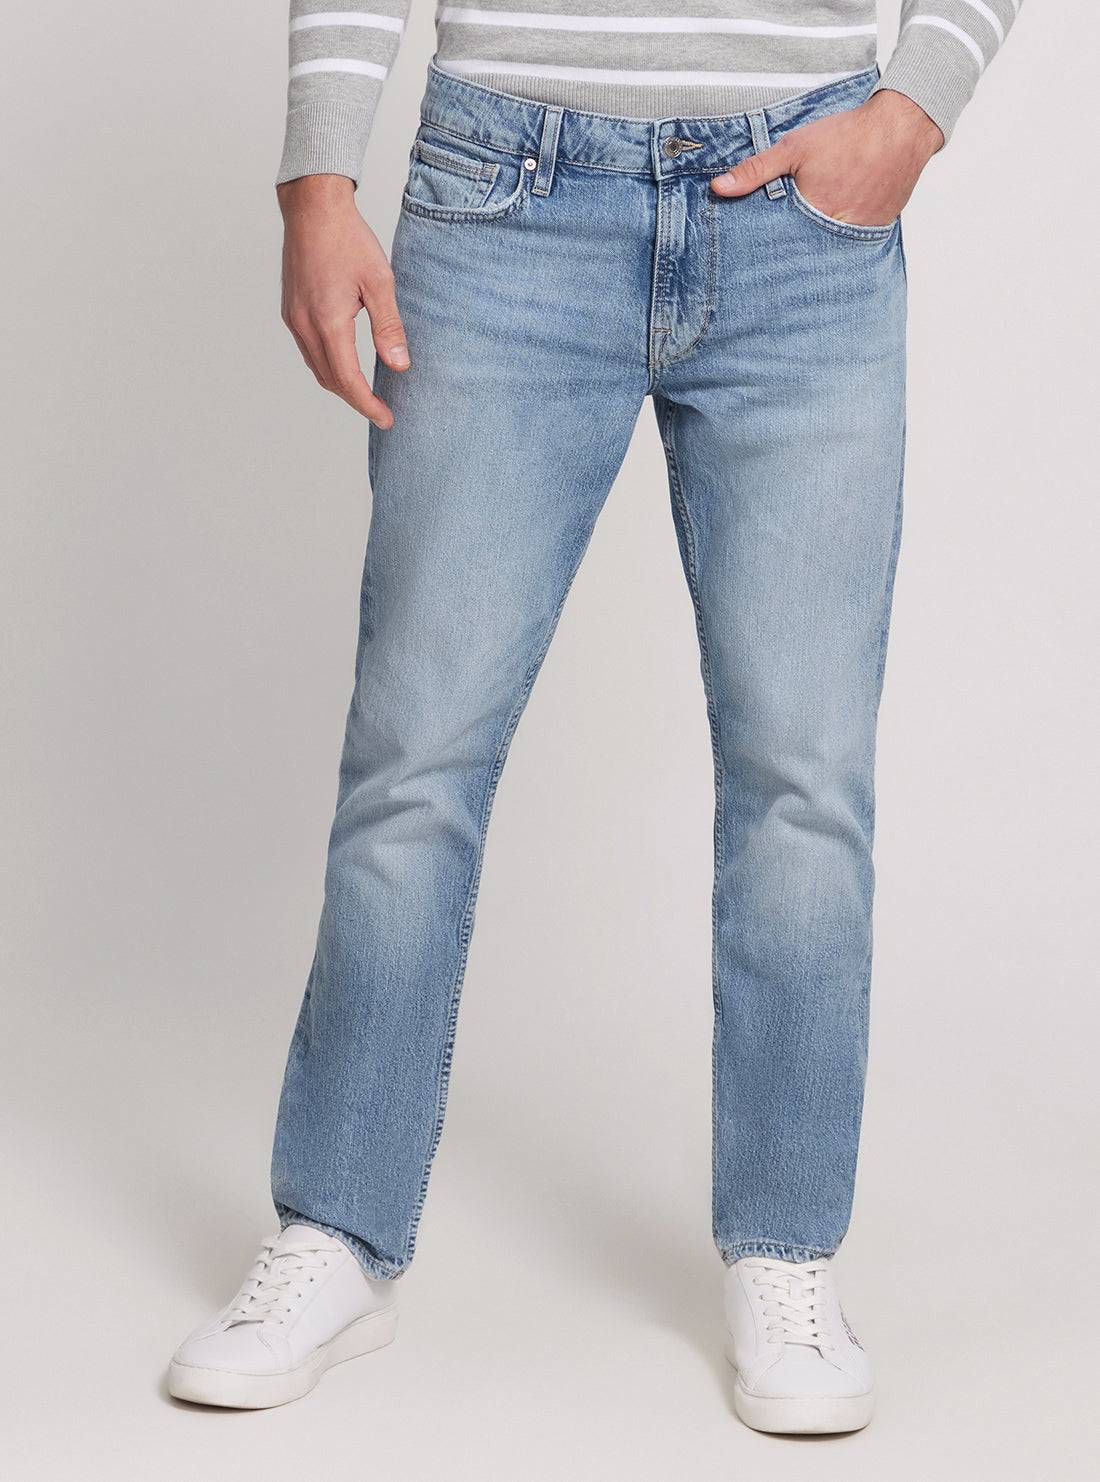 GUESS Low Rise Slim Tapered Denim Jeans in Light Wash front view